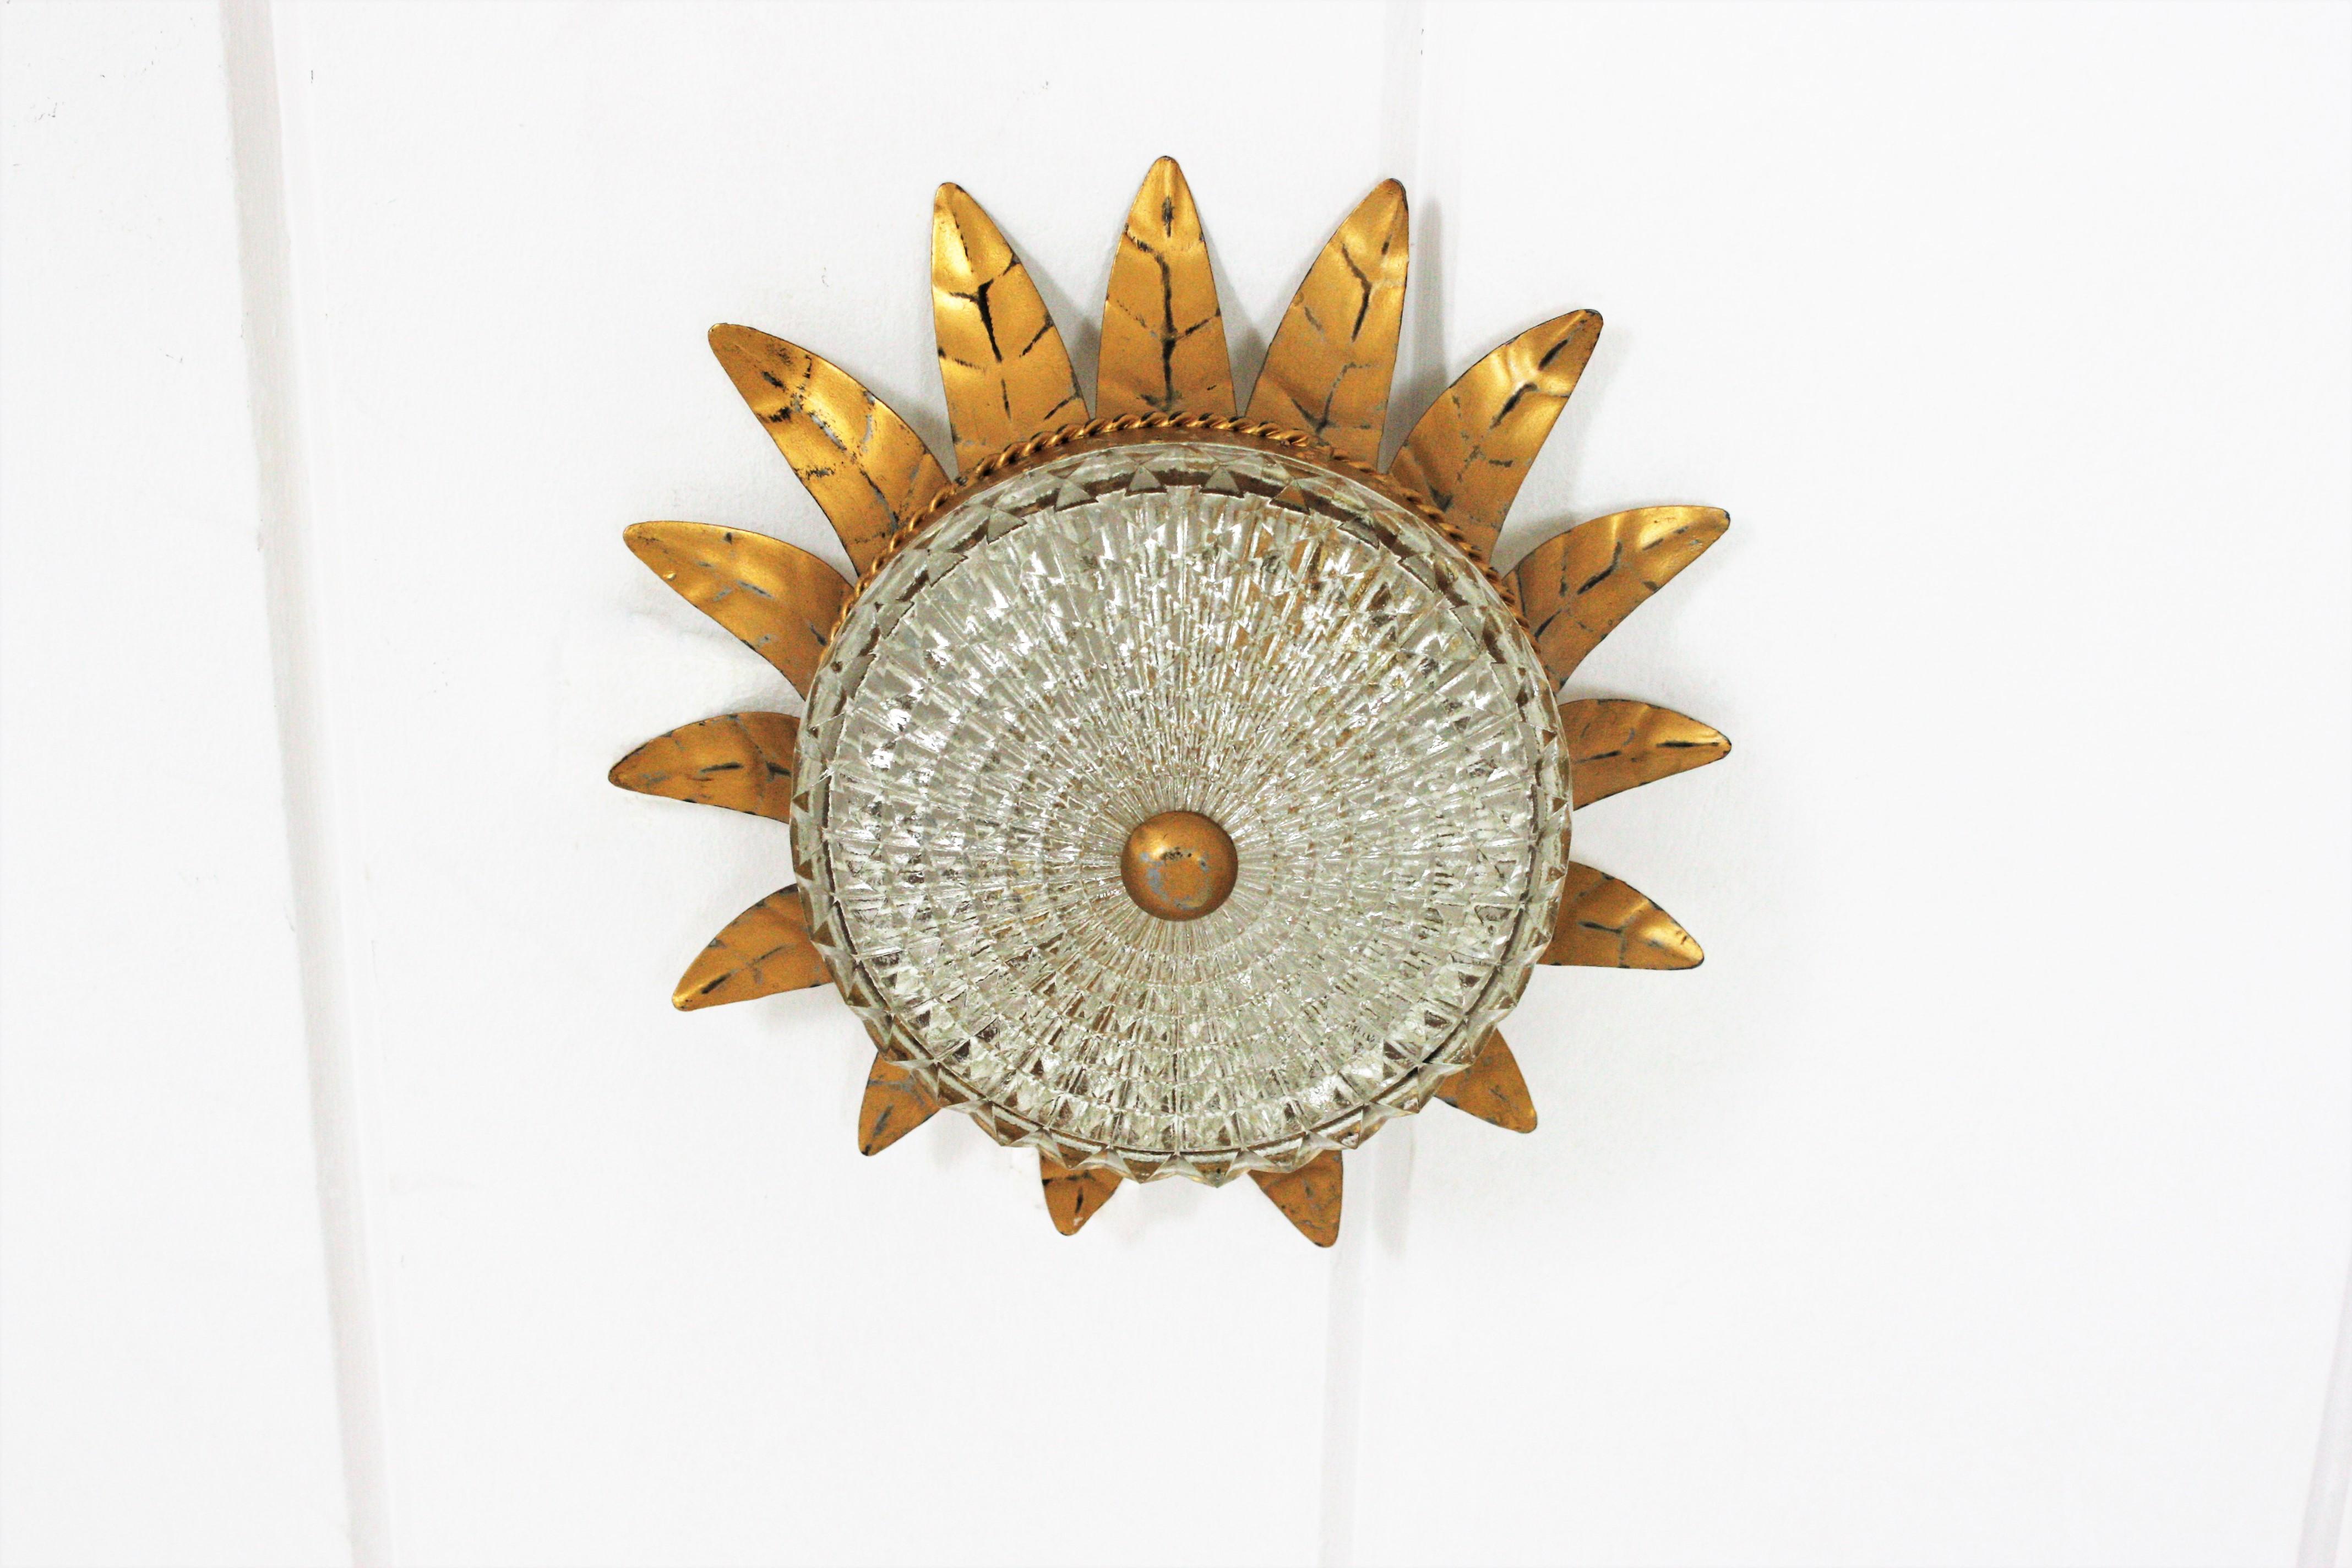 Elegant neoclassical style sunburst crown flush mount from the Mid-Century Modern period, Spain, 1950s.
This ceiling fixture features a gilt iron sunburst crown shaped structure with a pressed glass shade with a gilt iron finial.
It has a highly